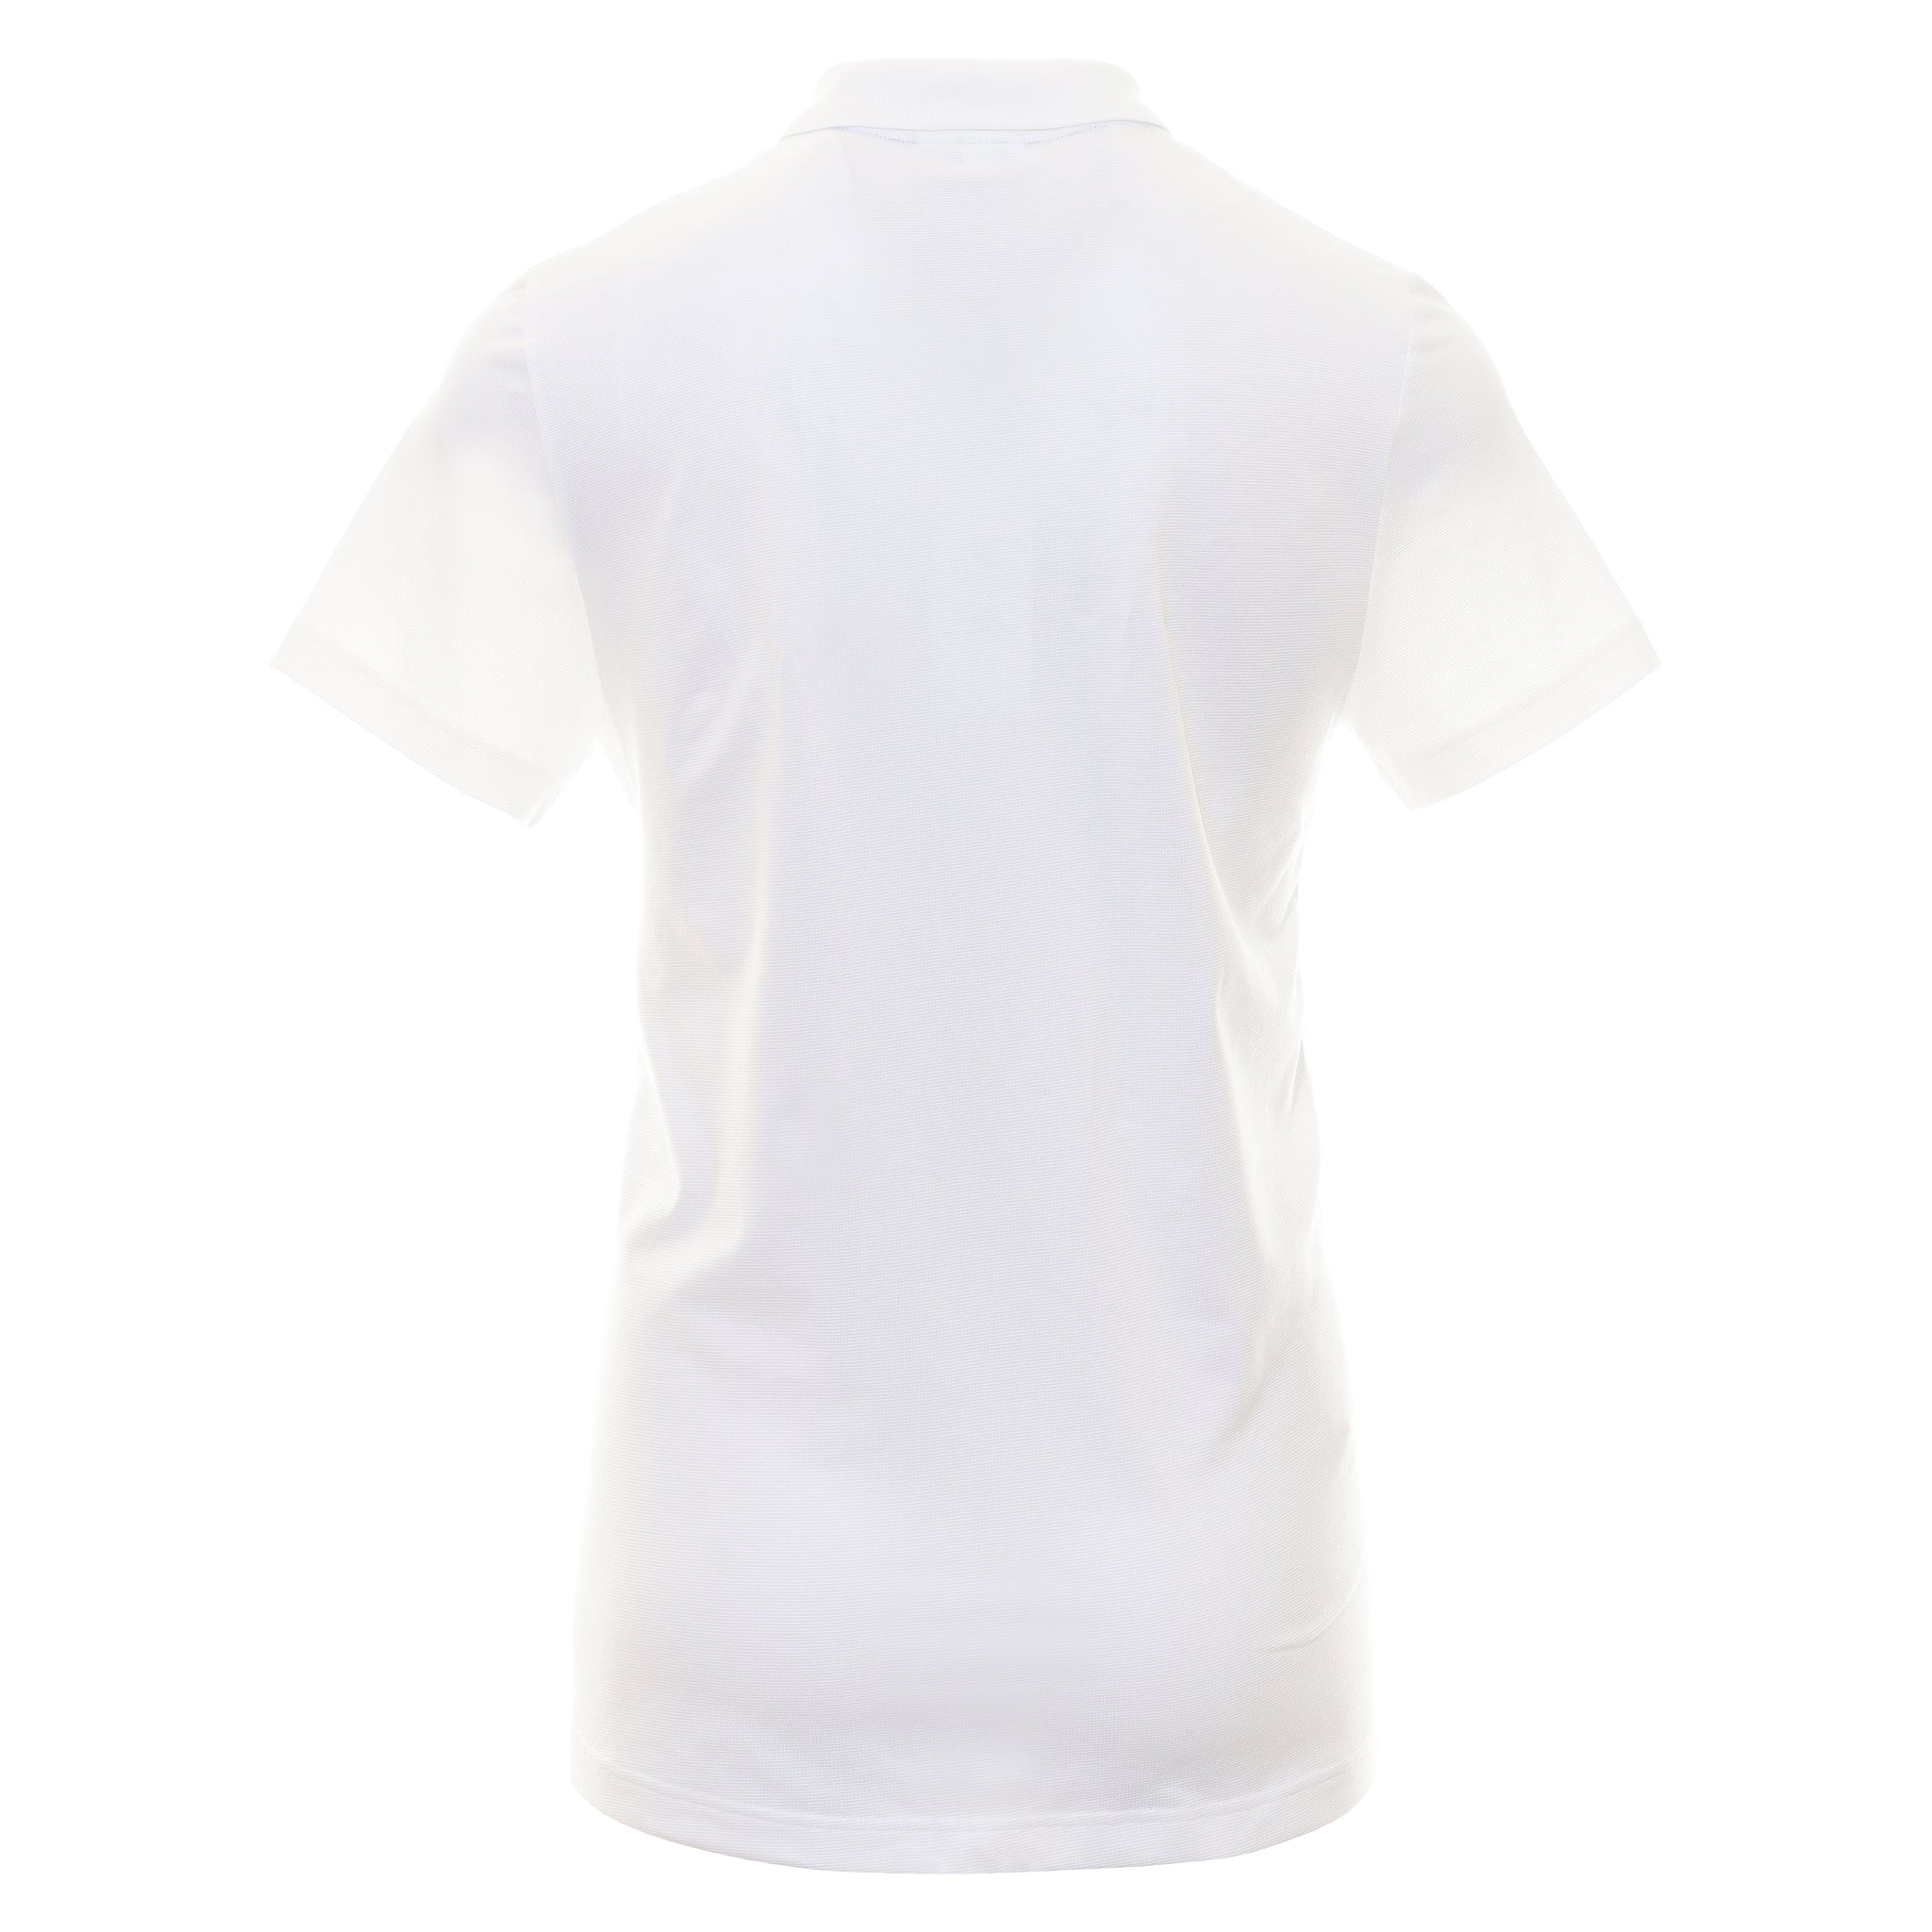 Lacoste Organic Cotton Stretch Polo Shirt DH0783 White 001 | Function18 ...